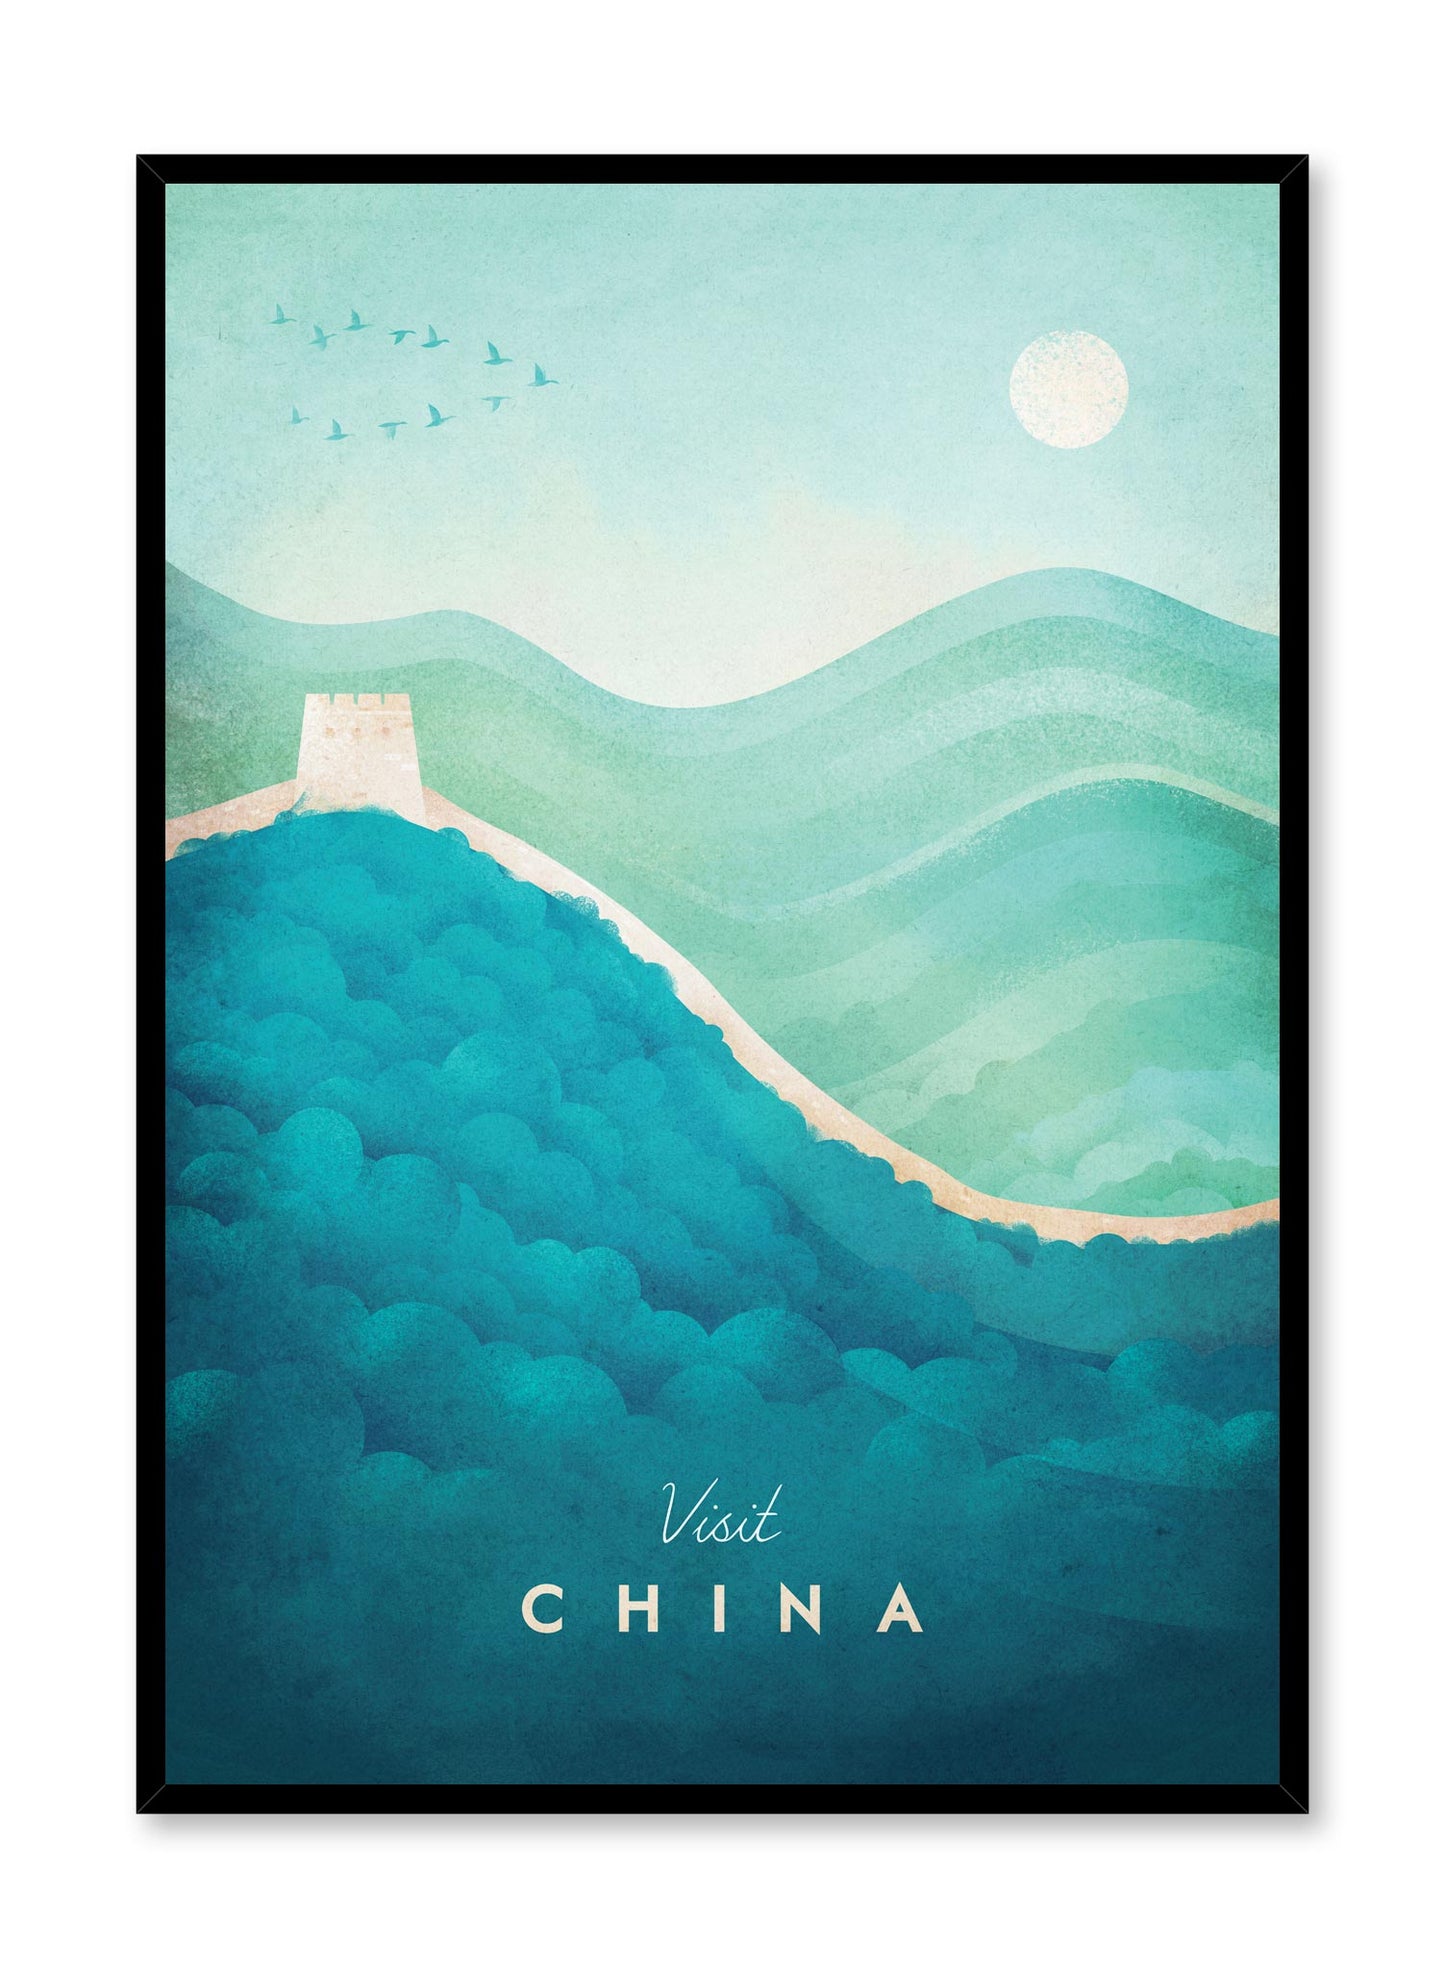 Modern minimalist travel poster by Opposite Wall with illustration of China